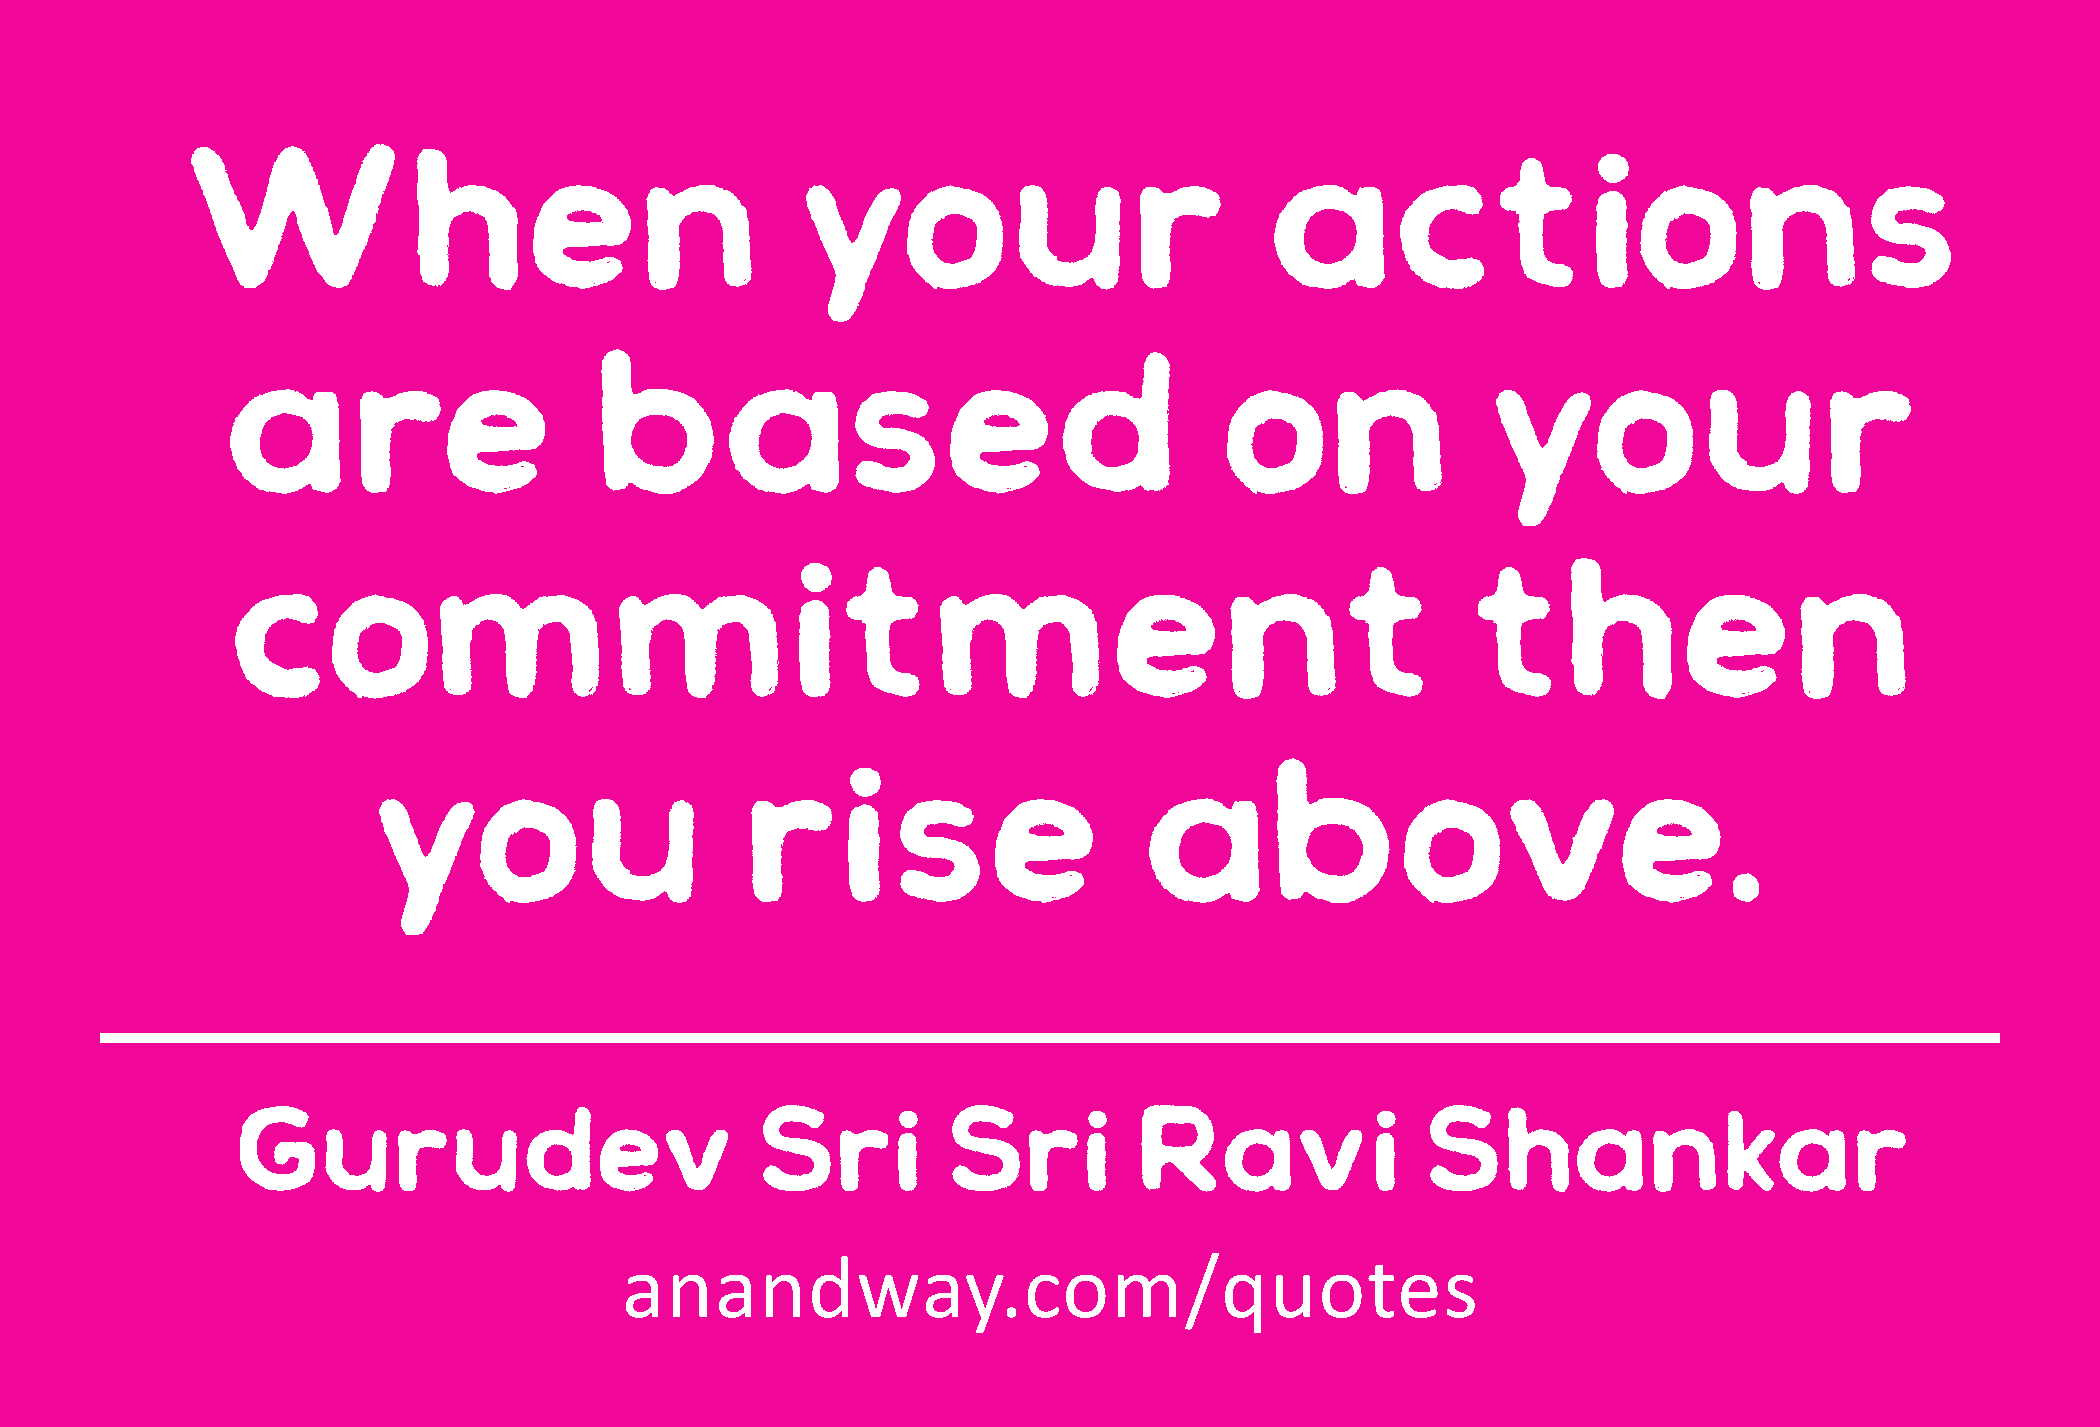 When your actions are based on your commitment then you rise above. 
 -Gurudev Sri Sri Ravi Shankar